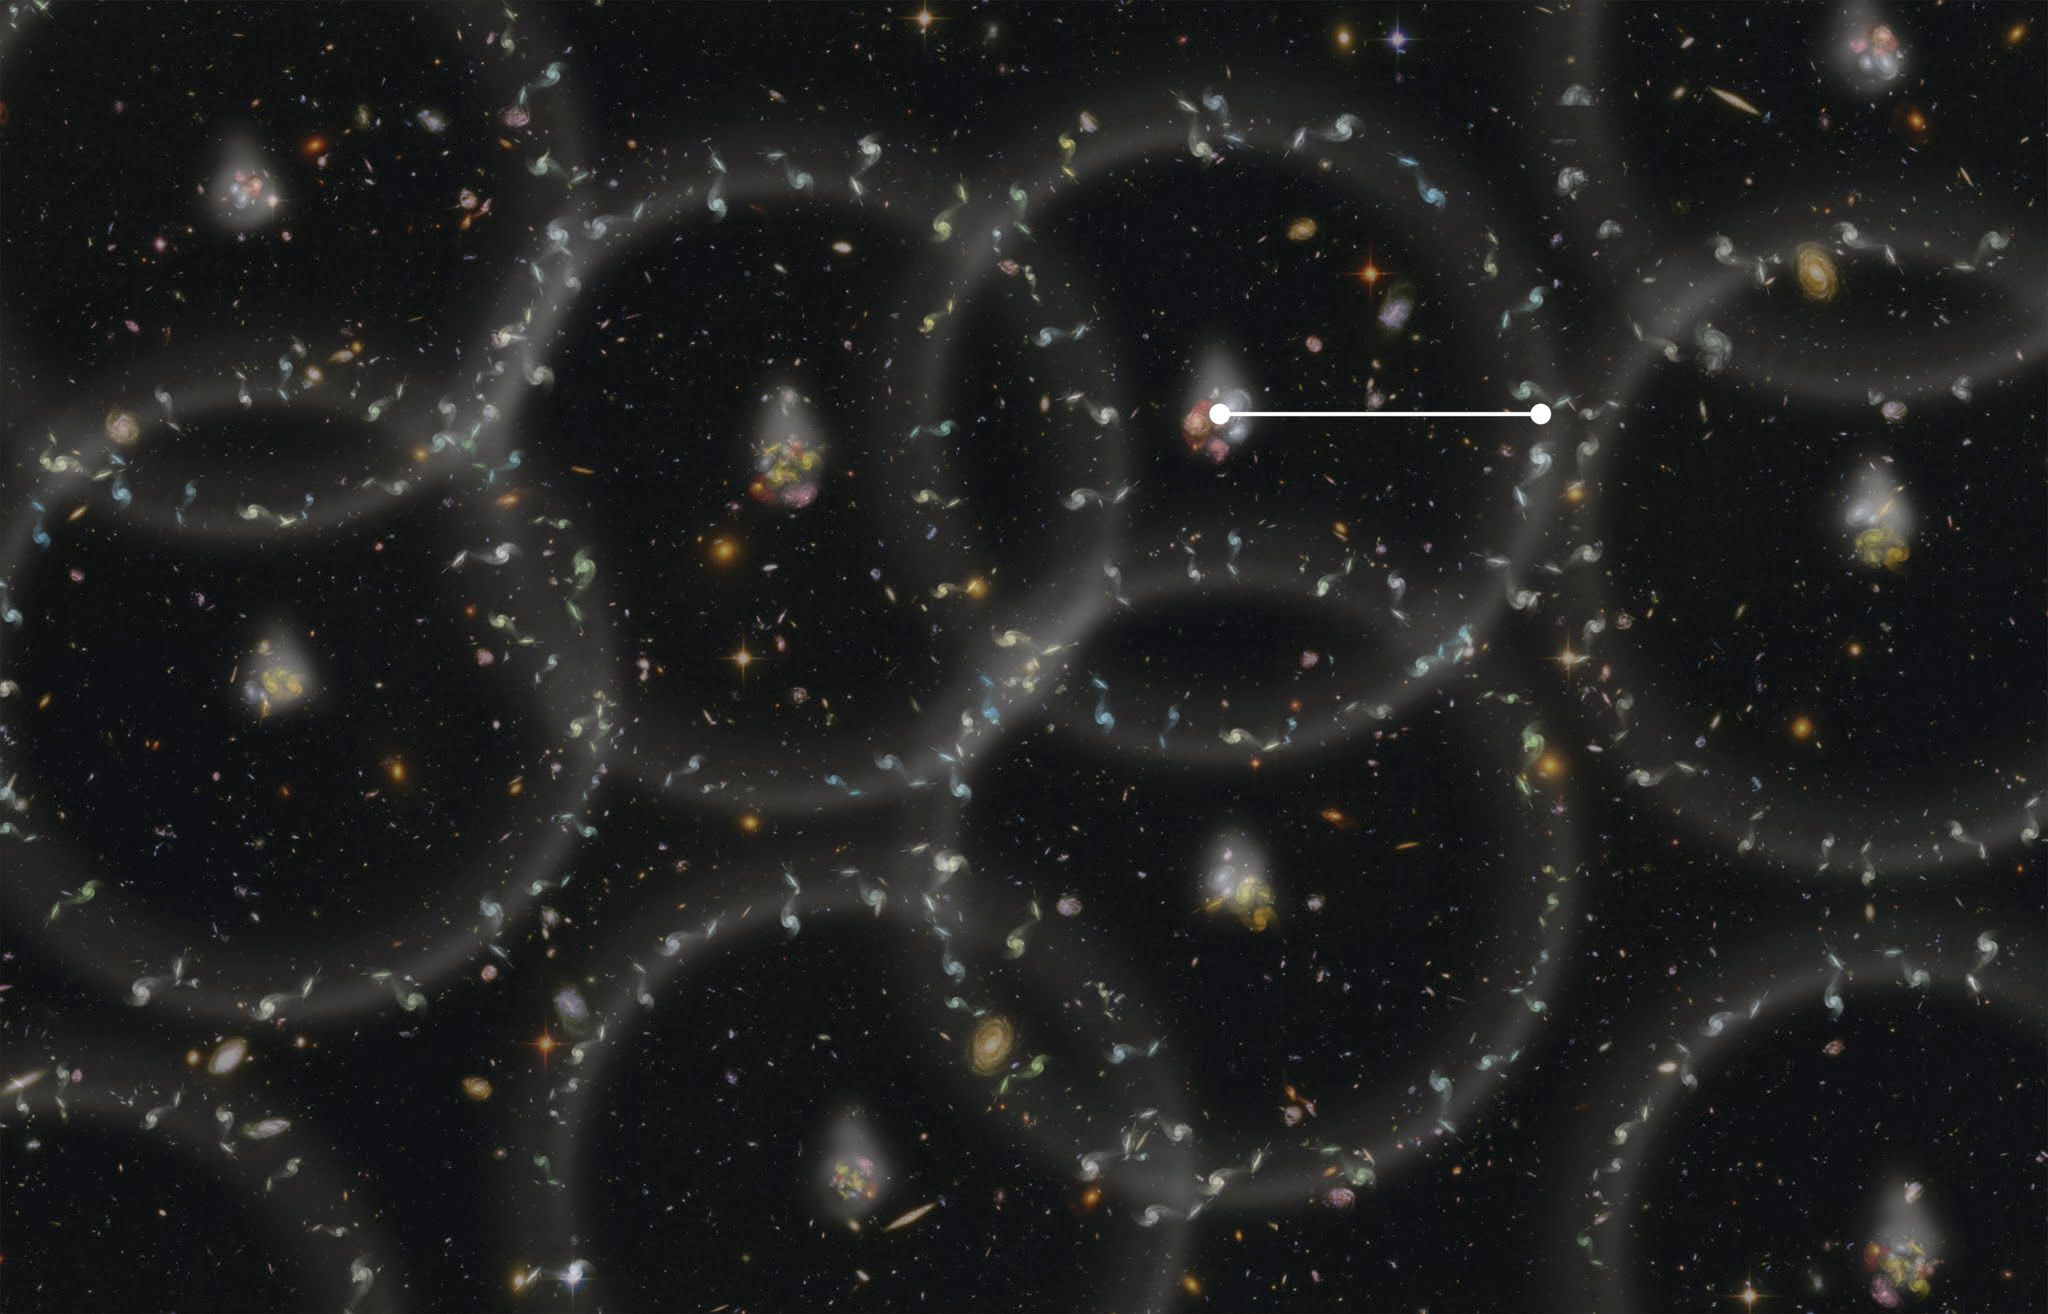 An artist's conception of the measurement scale of the universe. Baryon acoustic oscillations are the tendency of galaxies and other matter to cluster in spheres, which originated as density waves traveling through the plasma of the early universe. The clustering is greatly exaggerated in this illustration. The radius of the spheres (white line) is the scale of a “standard ruler” allowing astronomers to determine, within one percent accuracy, how the large-scale structure of the universe has evolved. (Image by Zosia Rostomian, Lawrence Berkeley National Laboratory)